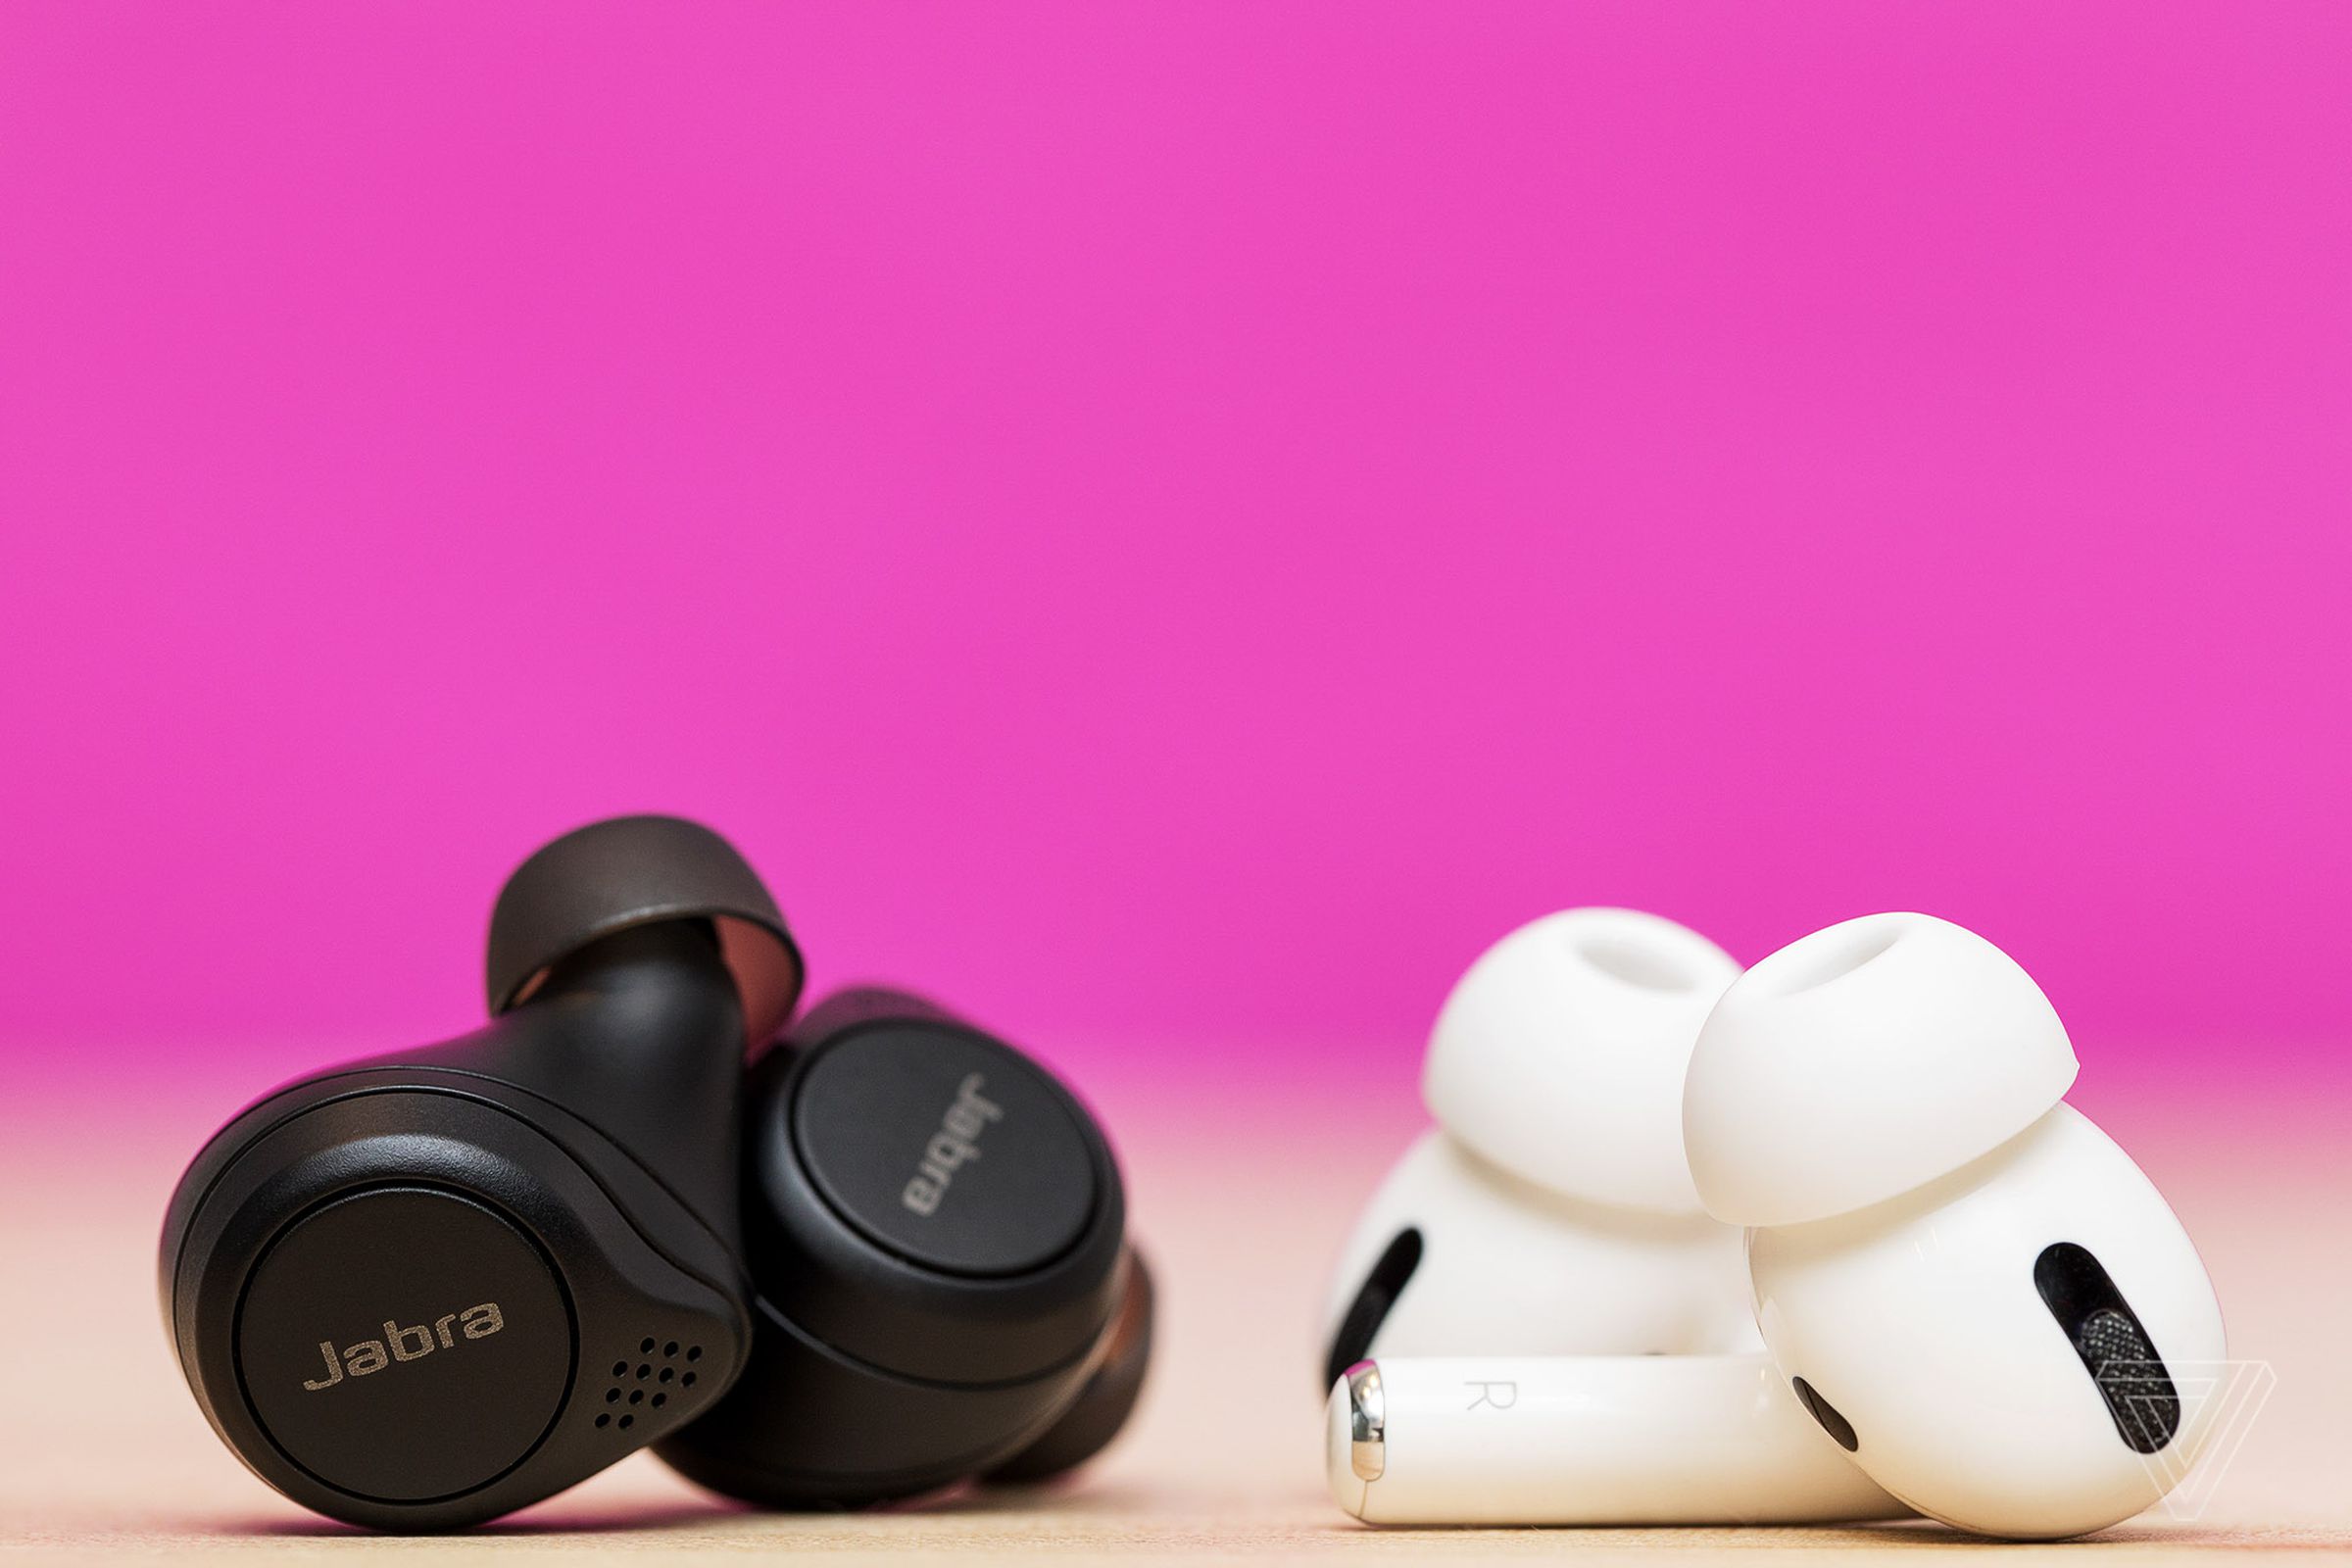 Jabra’s Elite 75t wireless earbuds are a comfortable alternative to Apple’s AirPods.